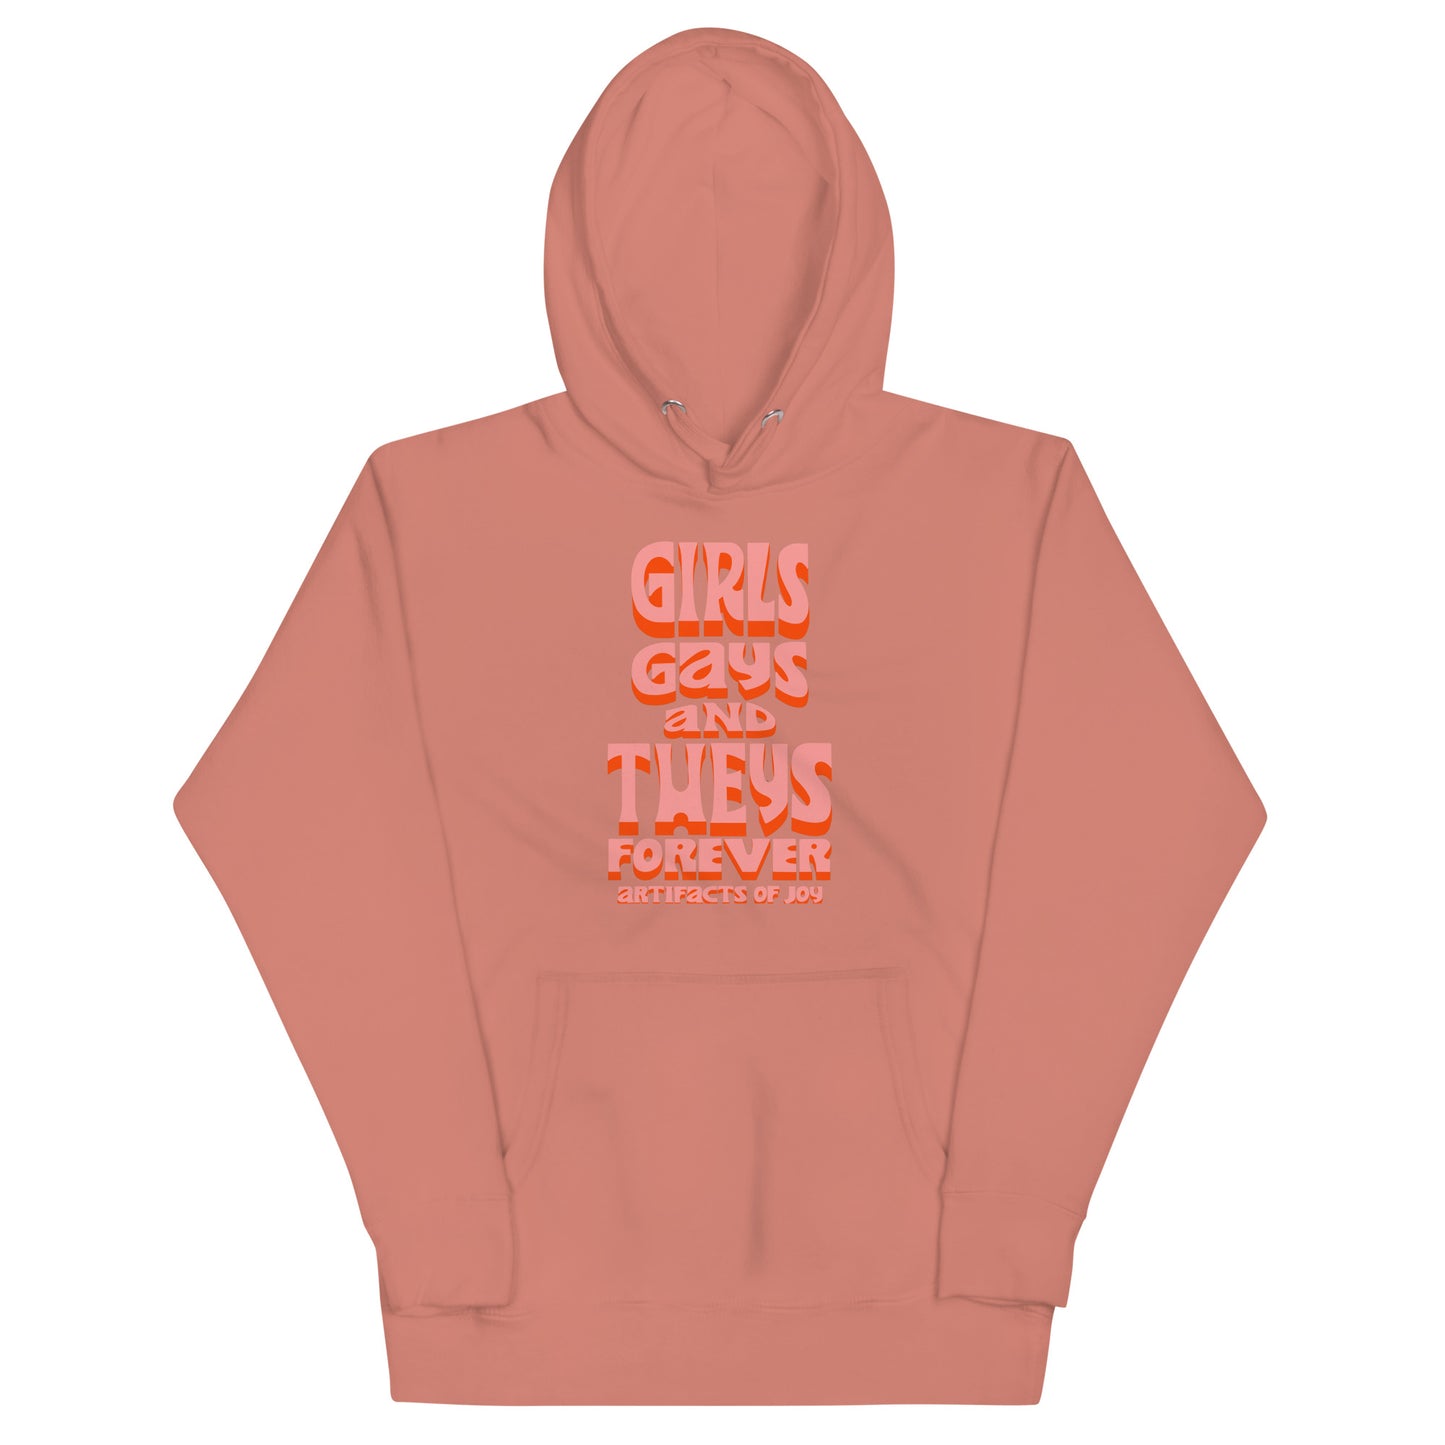 Hoodie Girls Gays and Theys Forever Unisex